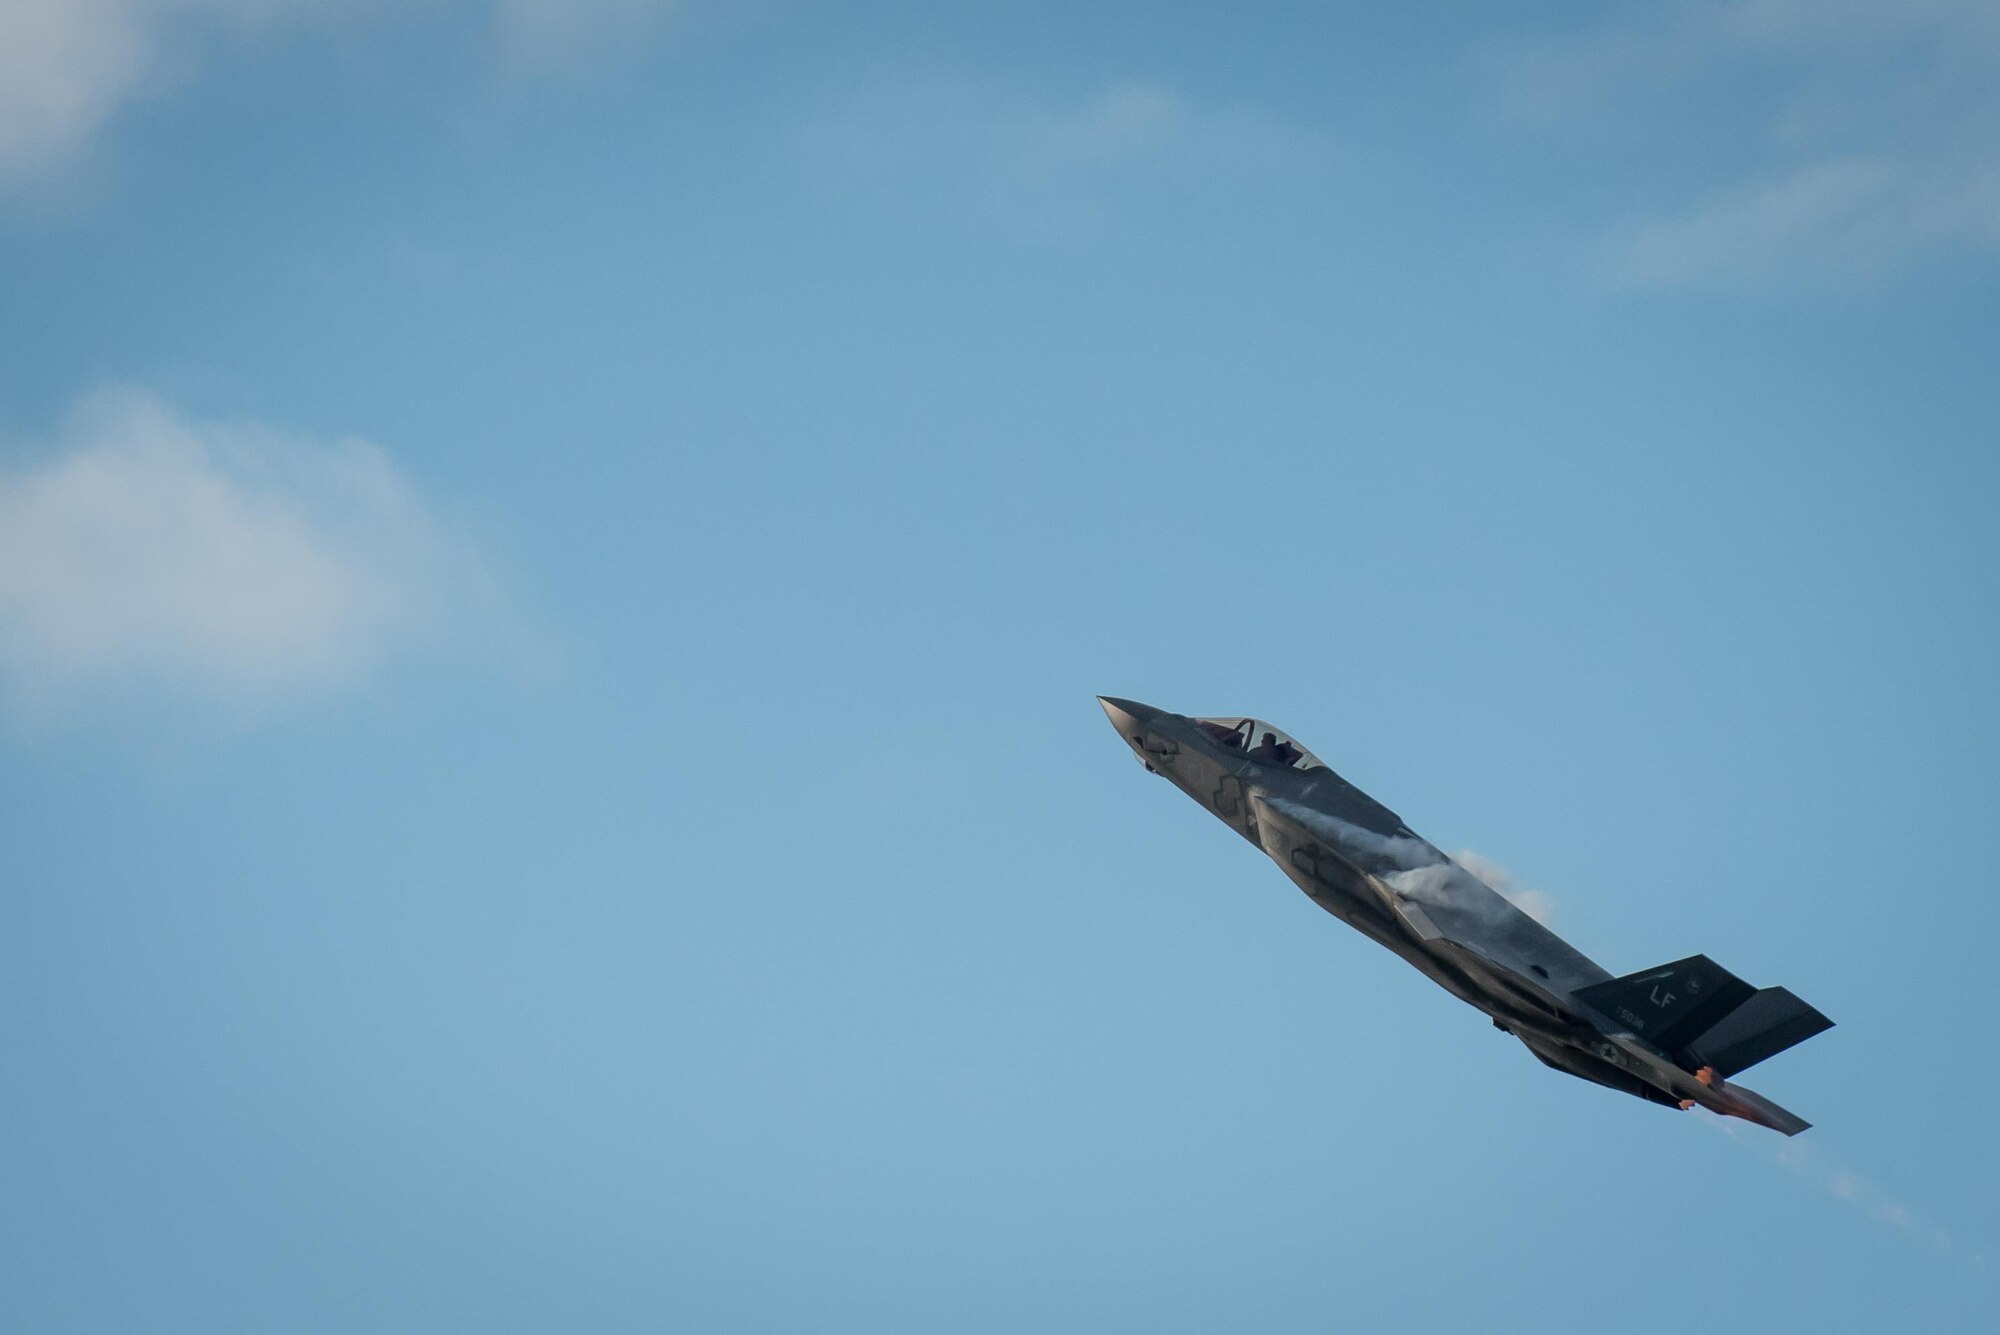 A U.S. Air Force F-35 Lightning II fighter aircraft flies an aerial demonstration over the Ohio River during the Thunder Over Louisville air show in Louisville, Ky., April 22, 2017. The F-35, from Luke Air Force Base, Ariz., is the Air Force’s newest fighter aircraft. (U.S. Air National Guard photo by Lt. Col. Dale Greer)